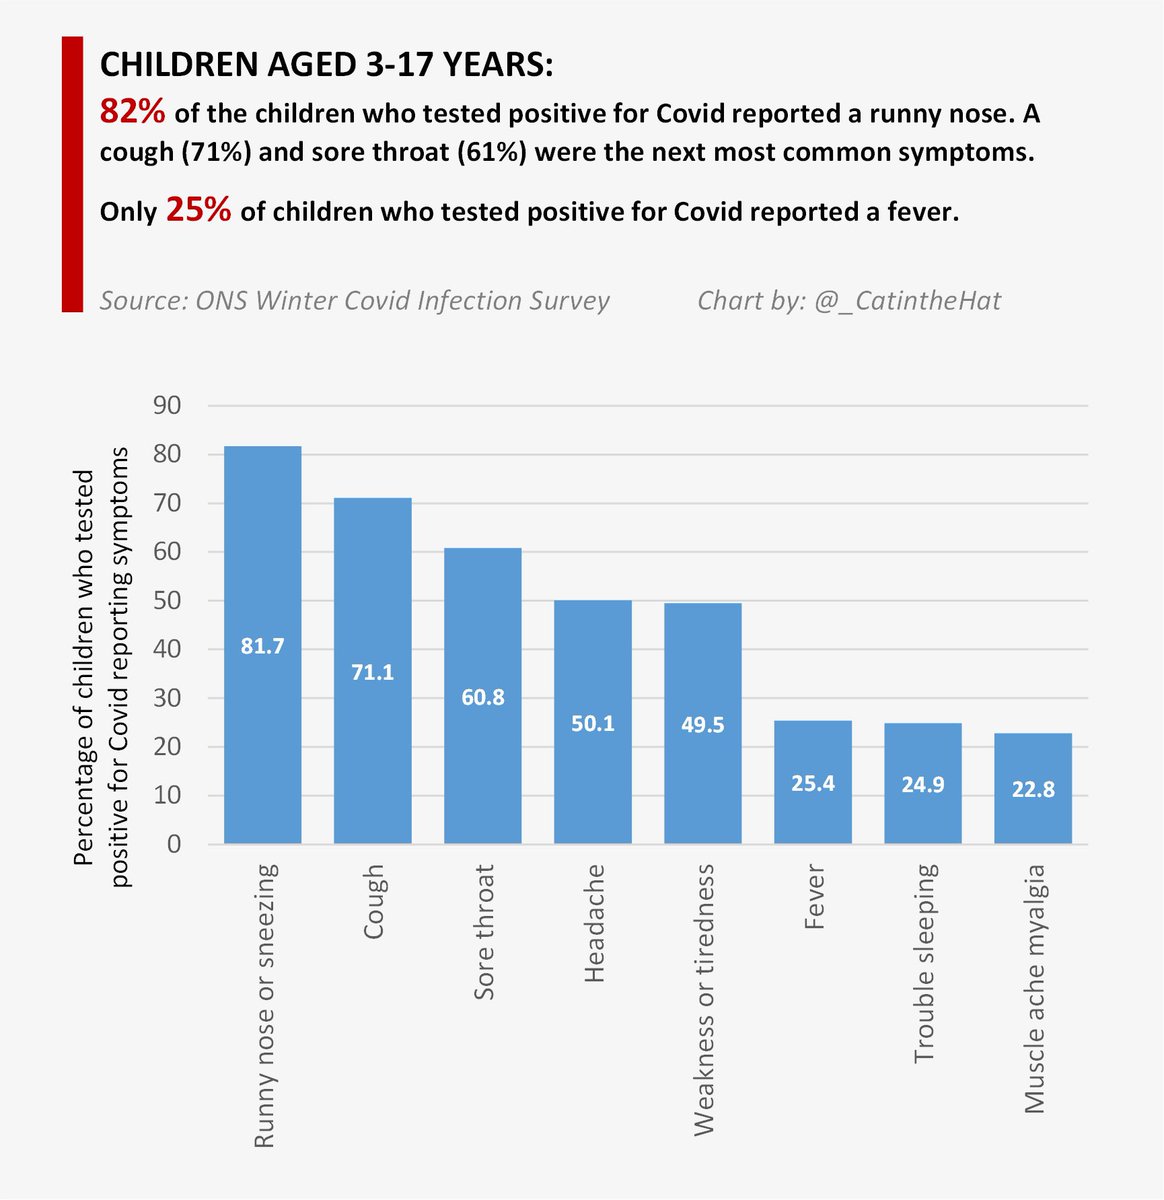 Another useful insight from the ONS data is prevalence of various symptoms amongst children who tested positive. The most common symptoms for those with Covid were: ▪️runny nose: 82% ▪️cough: 71% Fever was far less common, reported in just 25% of children who tested positive.